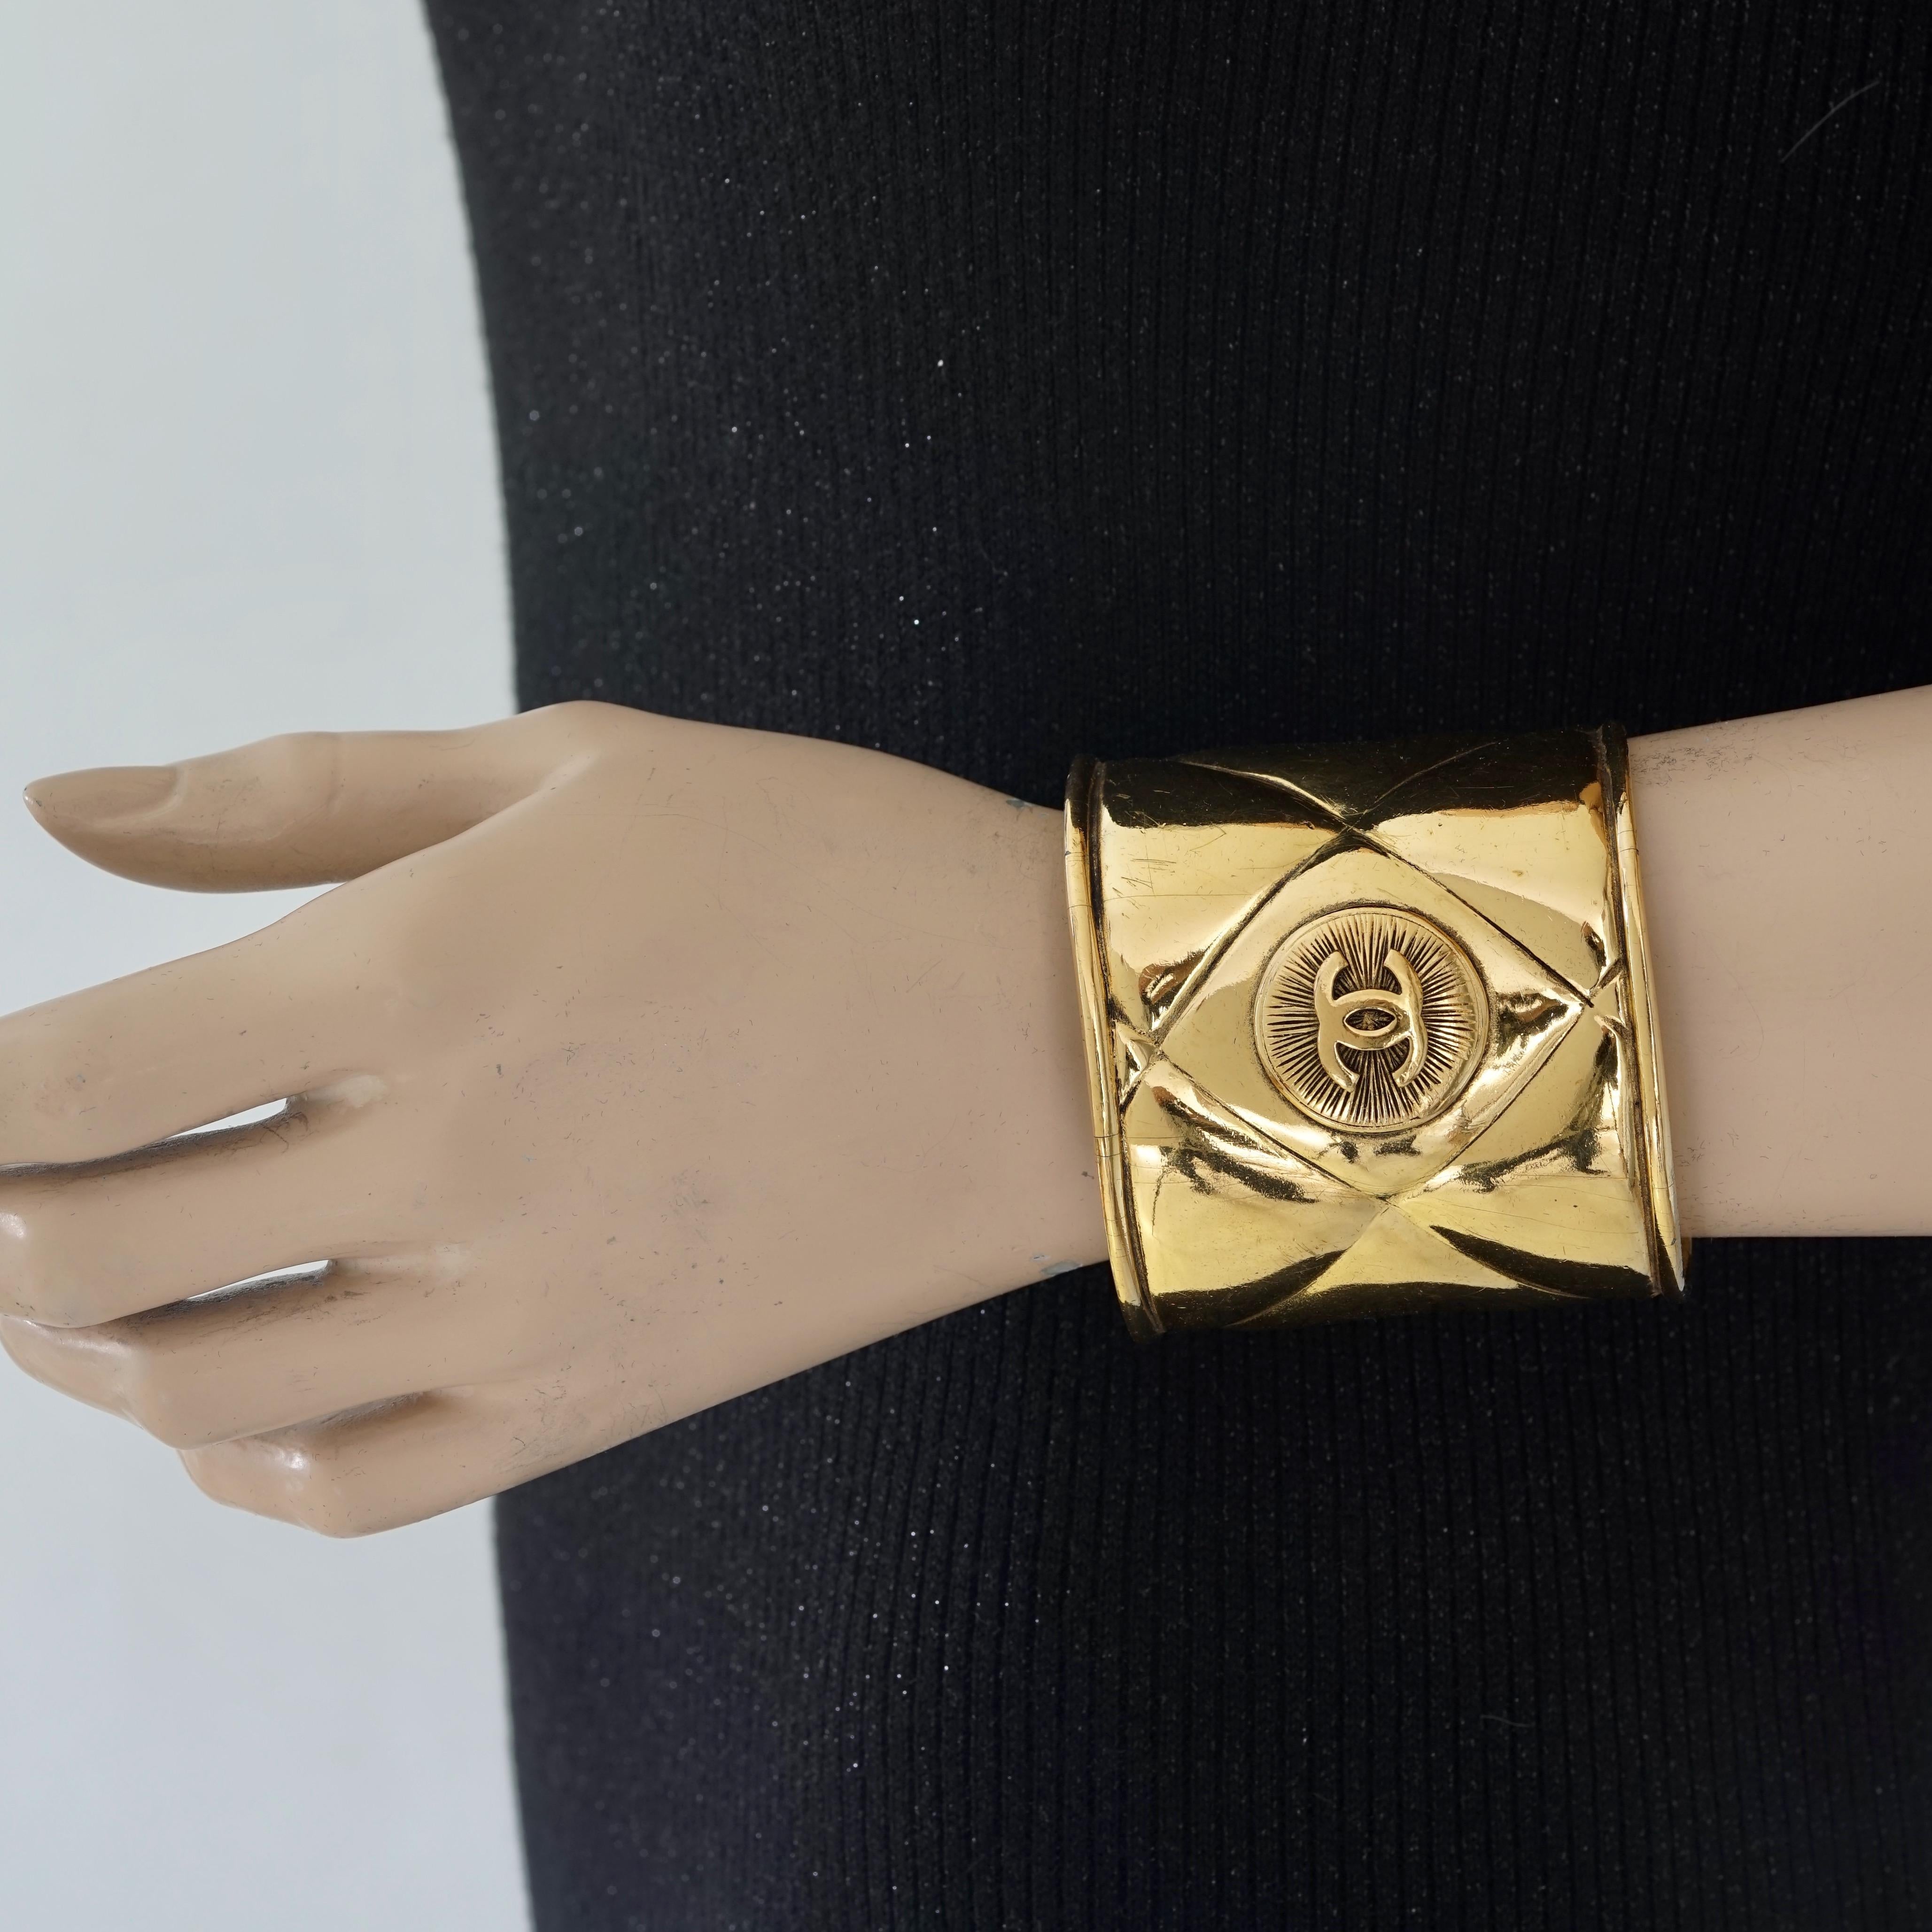 Vintage CHANEL Logo Medallion Quilted Cuff Bracelet

Measurements:
Height: 2.55 inches (6.5 cm)
Inner Circumference: 7.08 inches (18 cm) opening included

Features:
- 100% Authentic CHANEL.
- Quilted wide cuff bracelet with CC logo medallion at the